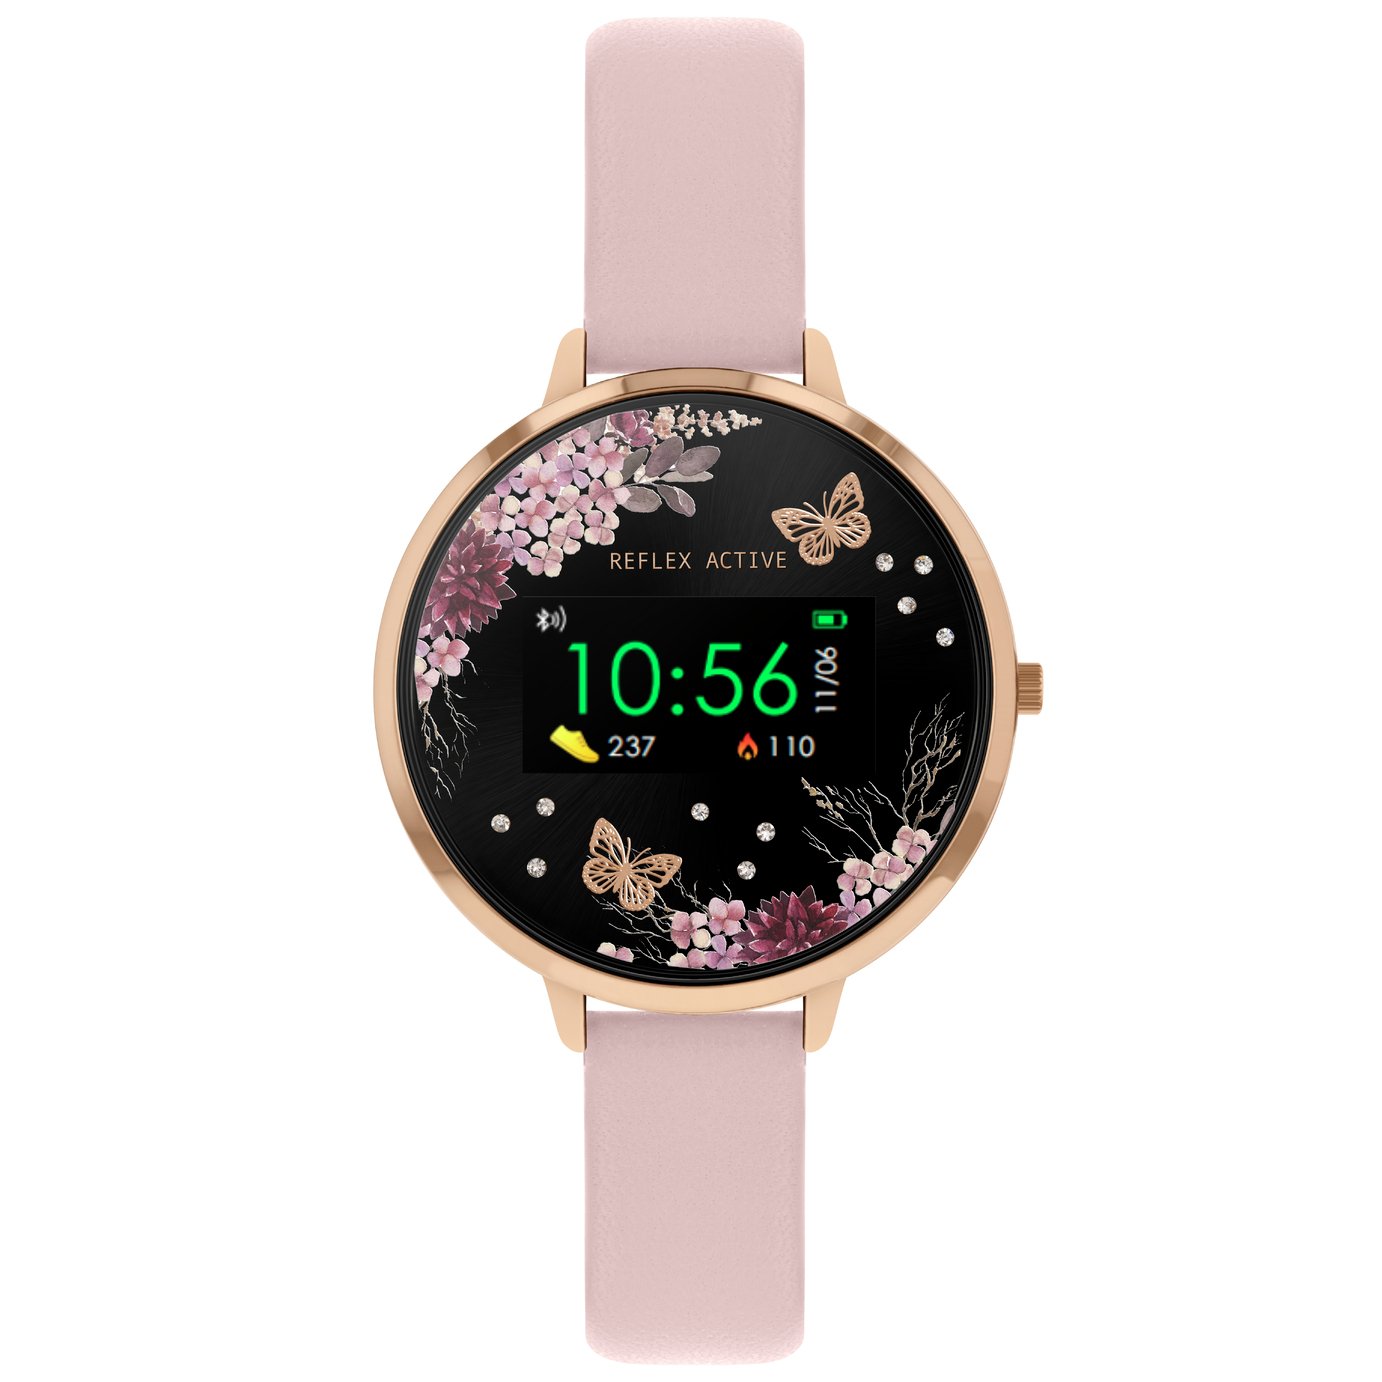 Reflex Active Smart Watch Nude Pink Strap Review